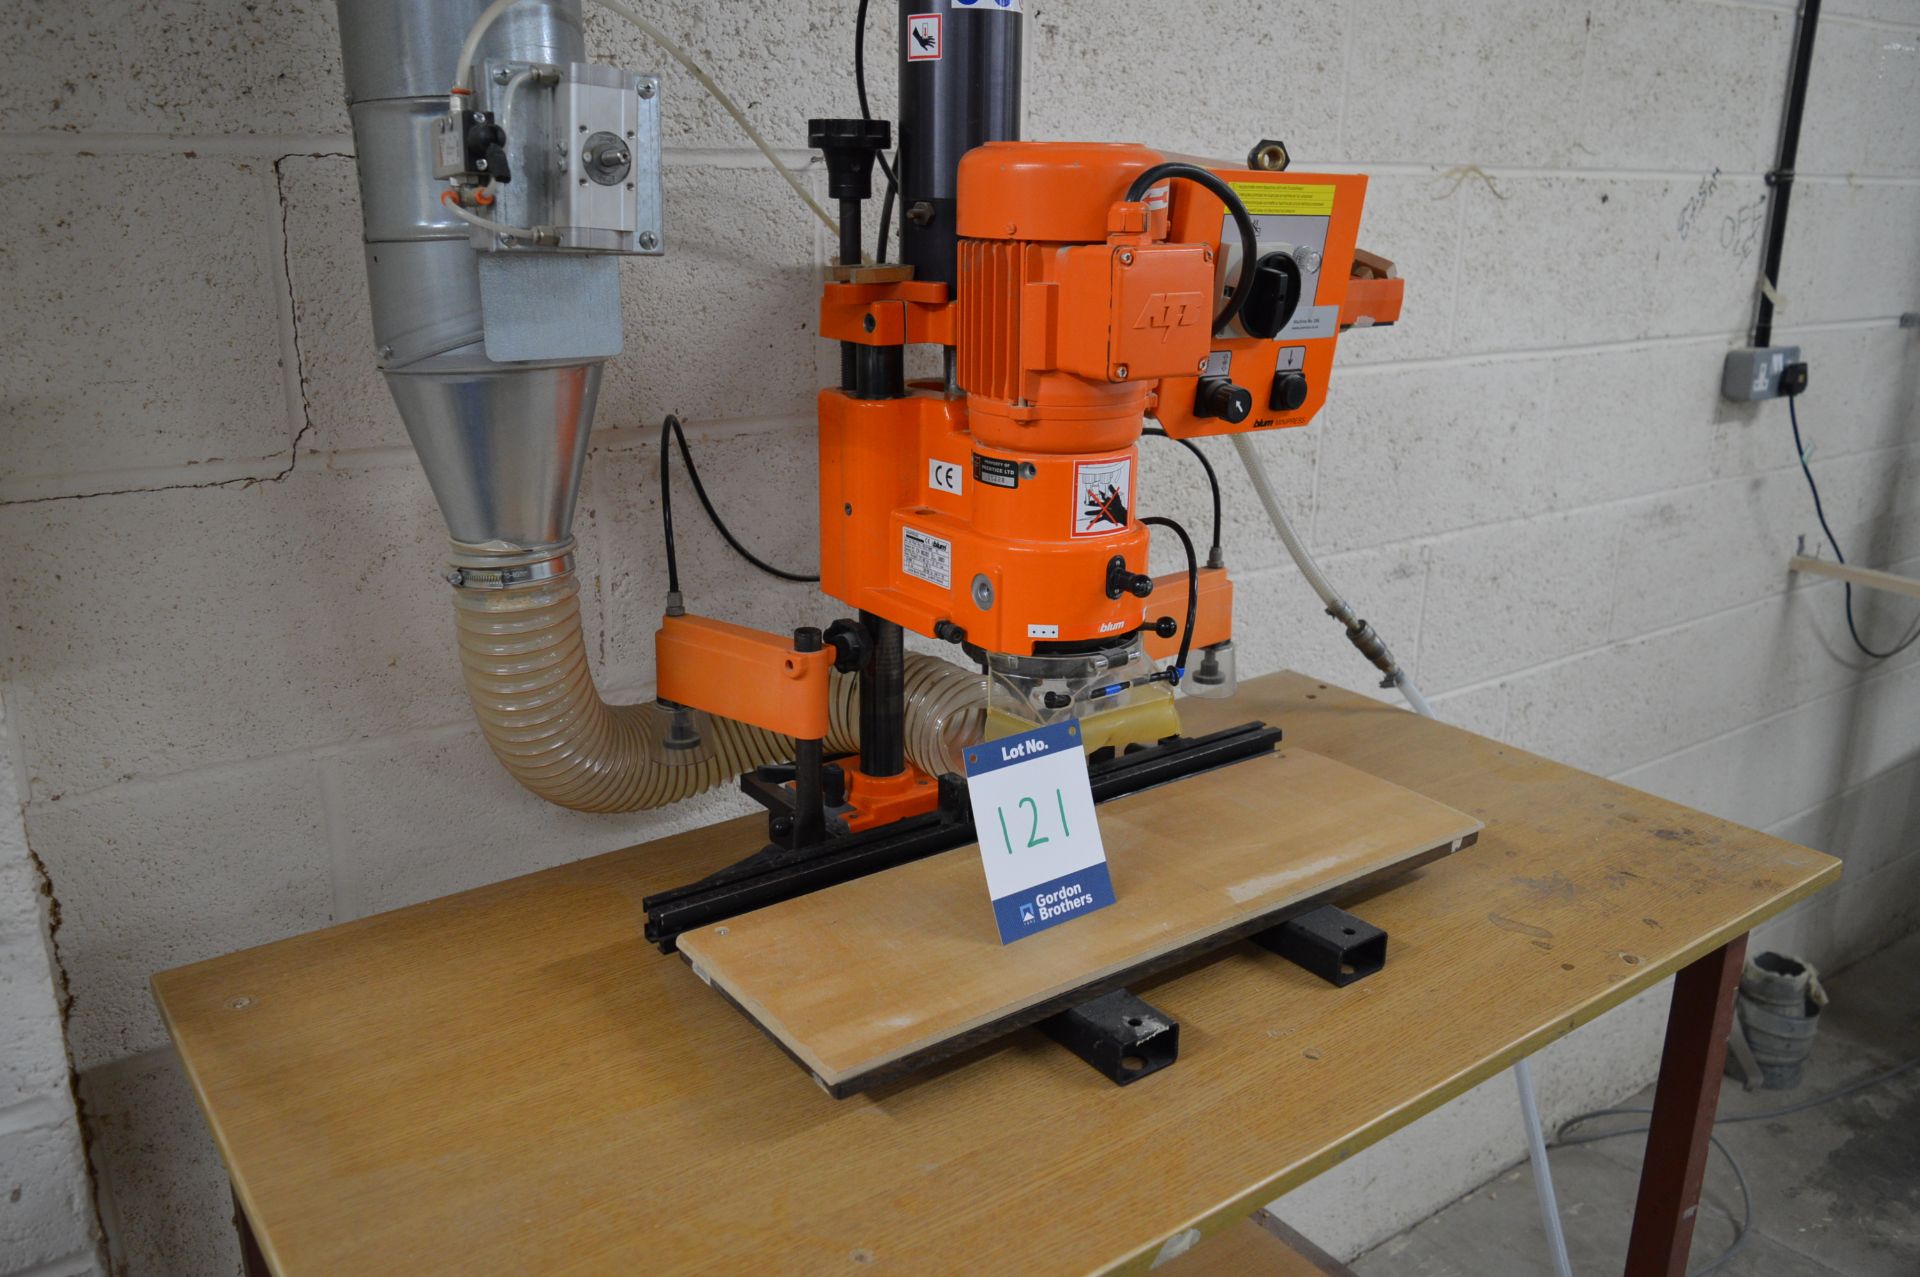 Blum, MiniPress M51P1000 drilling machine, Serial No. EA 06282 (2003) with fabricated steel framed